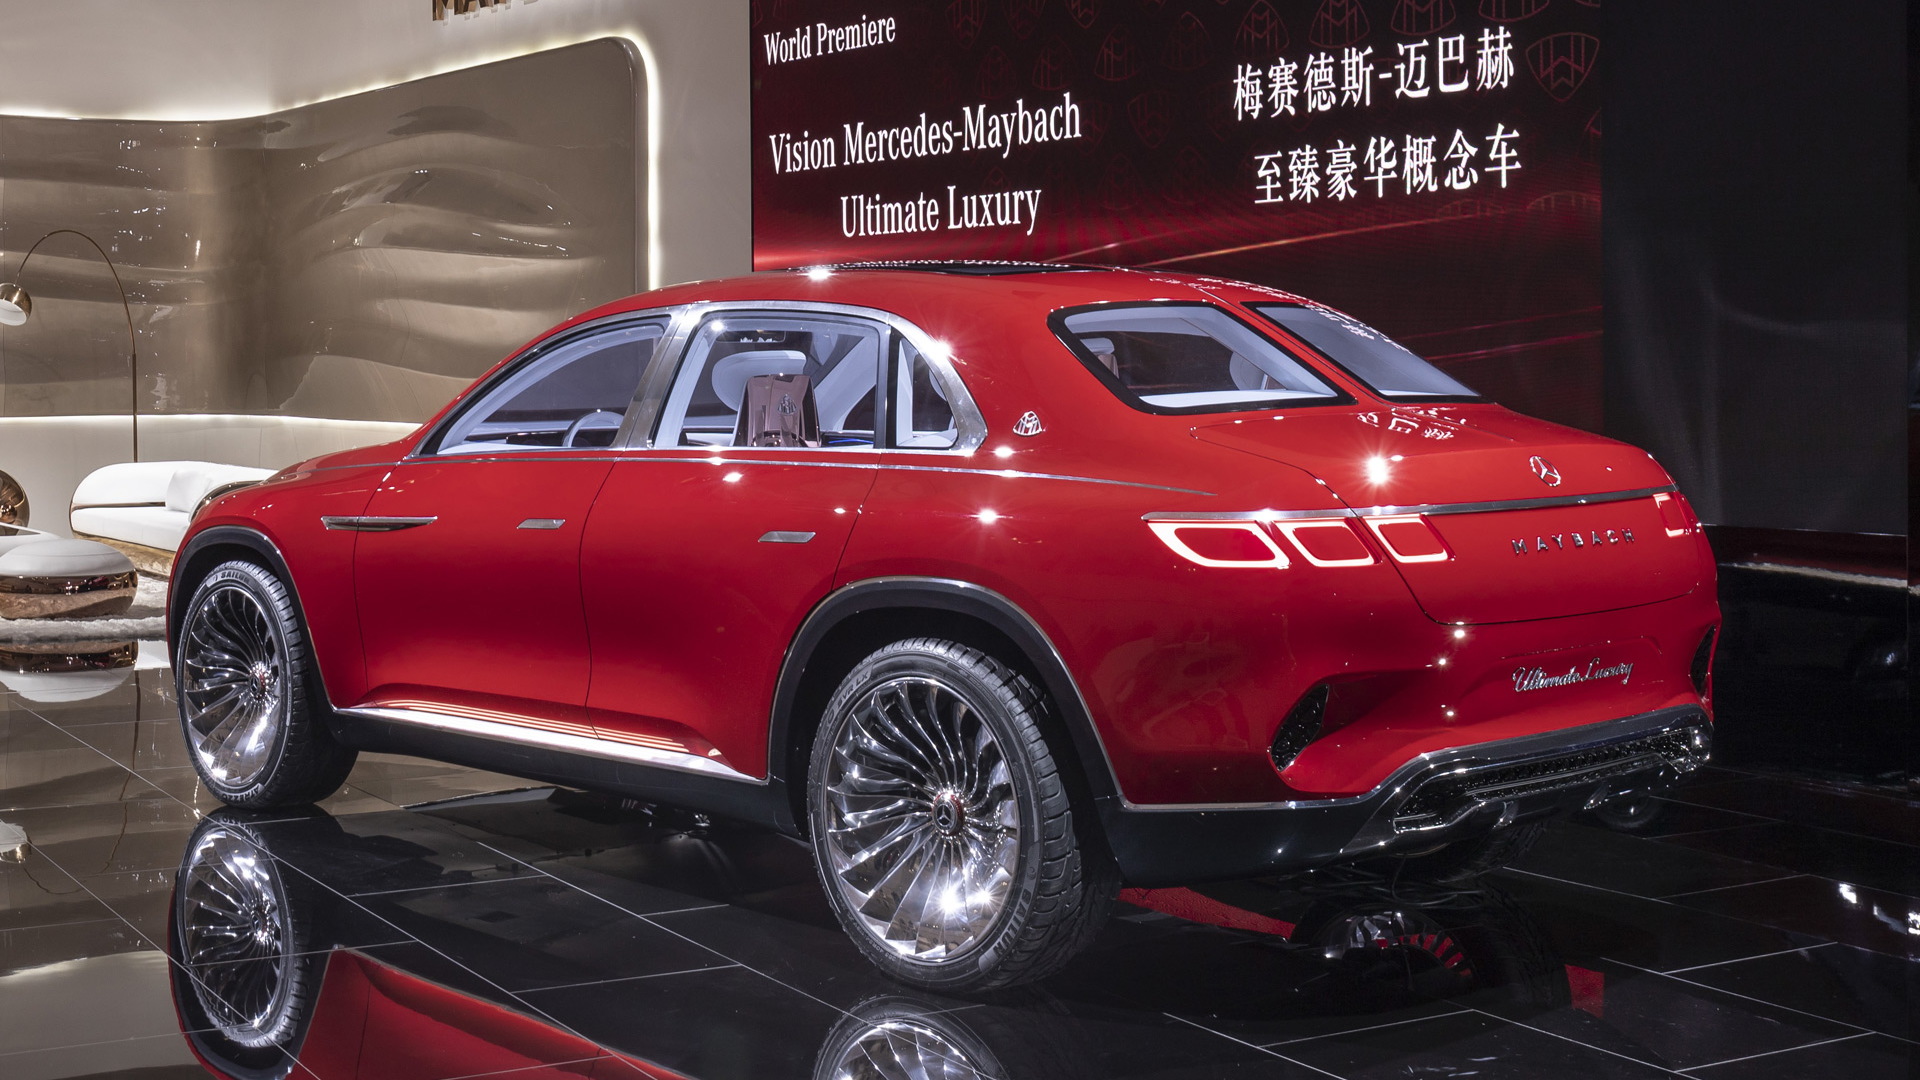 2018 - [Mercedes-Benz] GLB - Page 7 Vision-mercedes-maybach-ultimate-luxury-concept_100650375